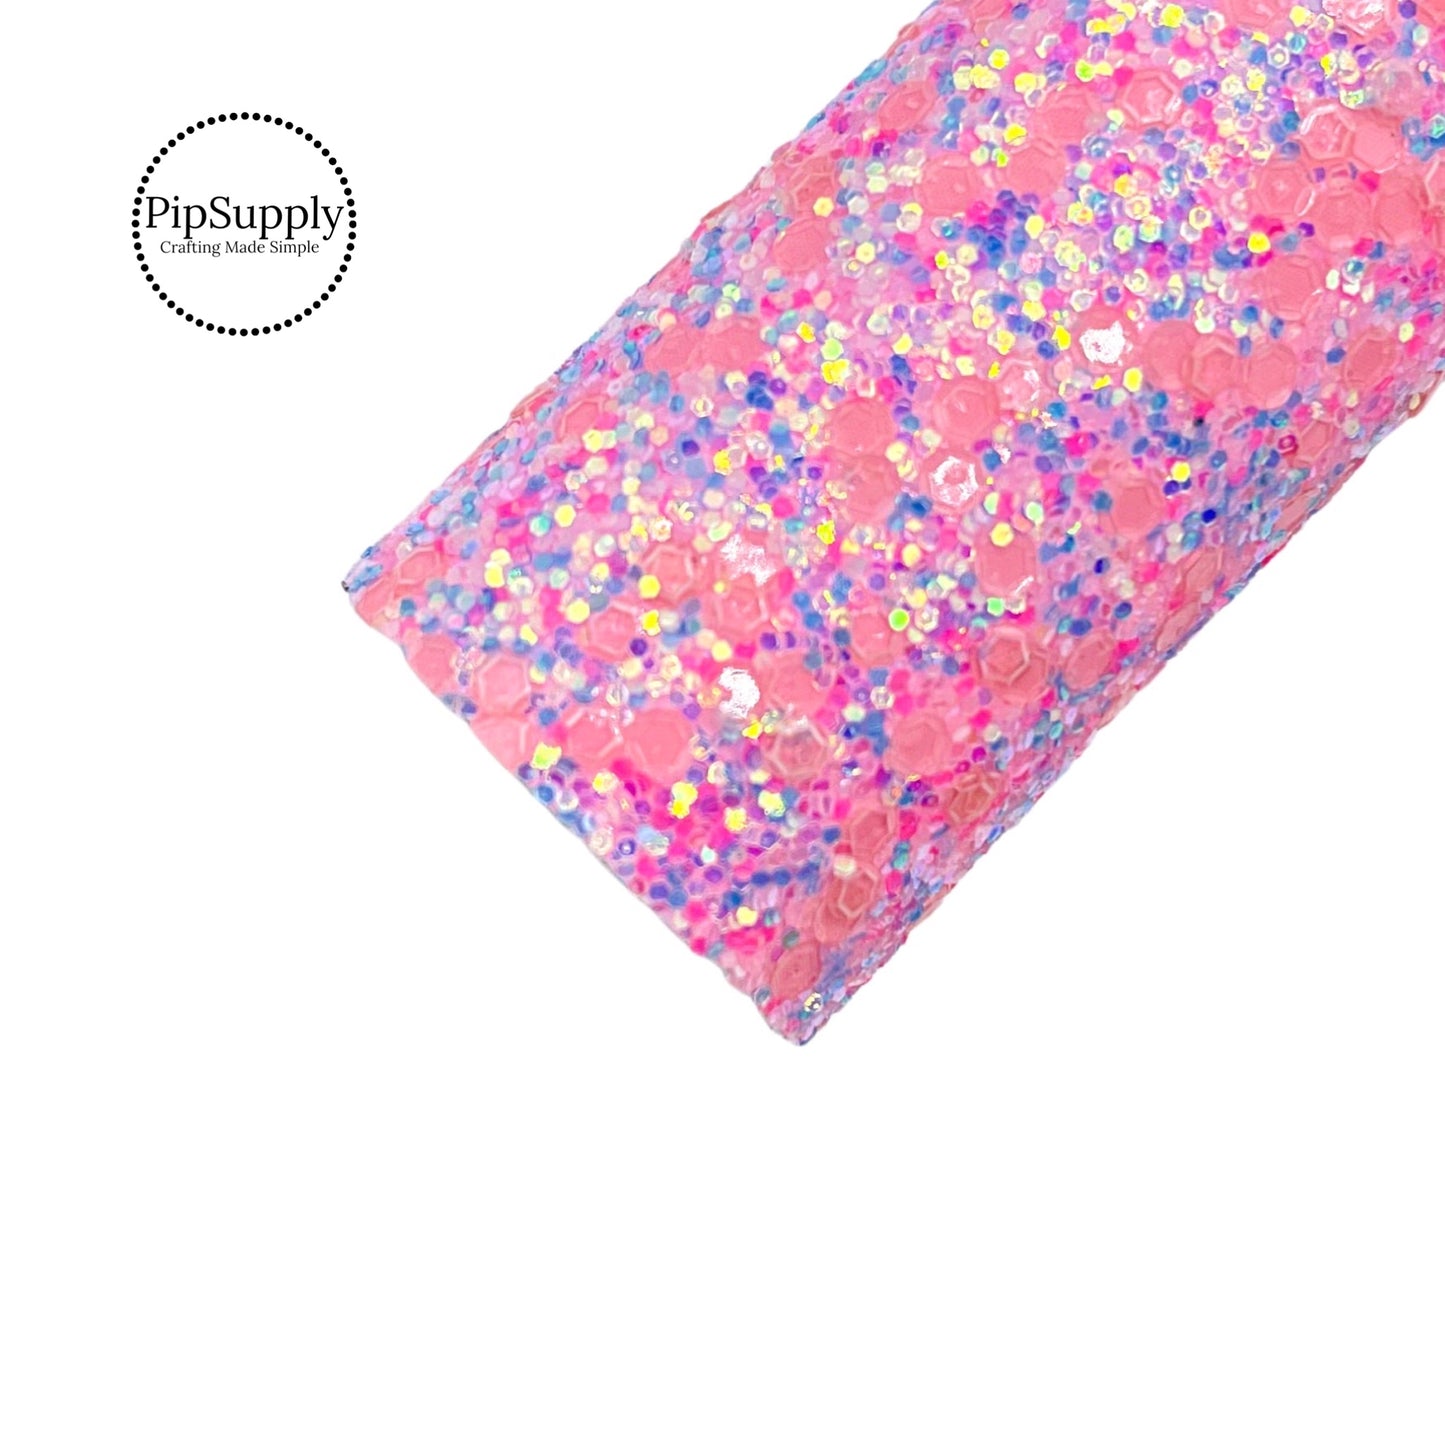 Hot pink and blue mixed chunky glitter sheet